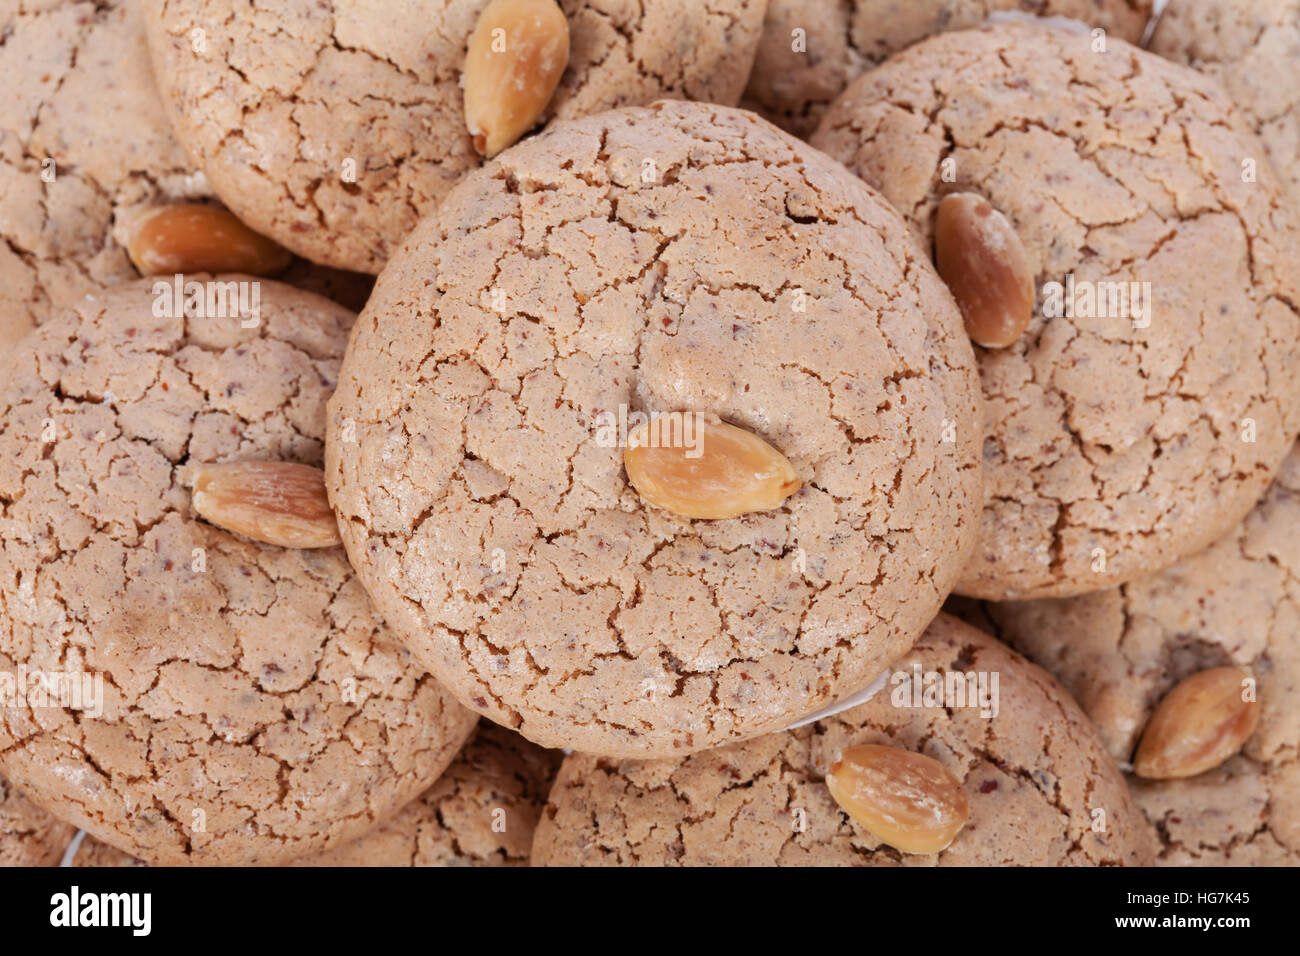 Almendrados, a typical and traditional almond biscuit from the Algarve region of Portugal Stock Photo